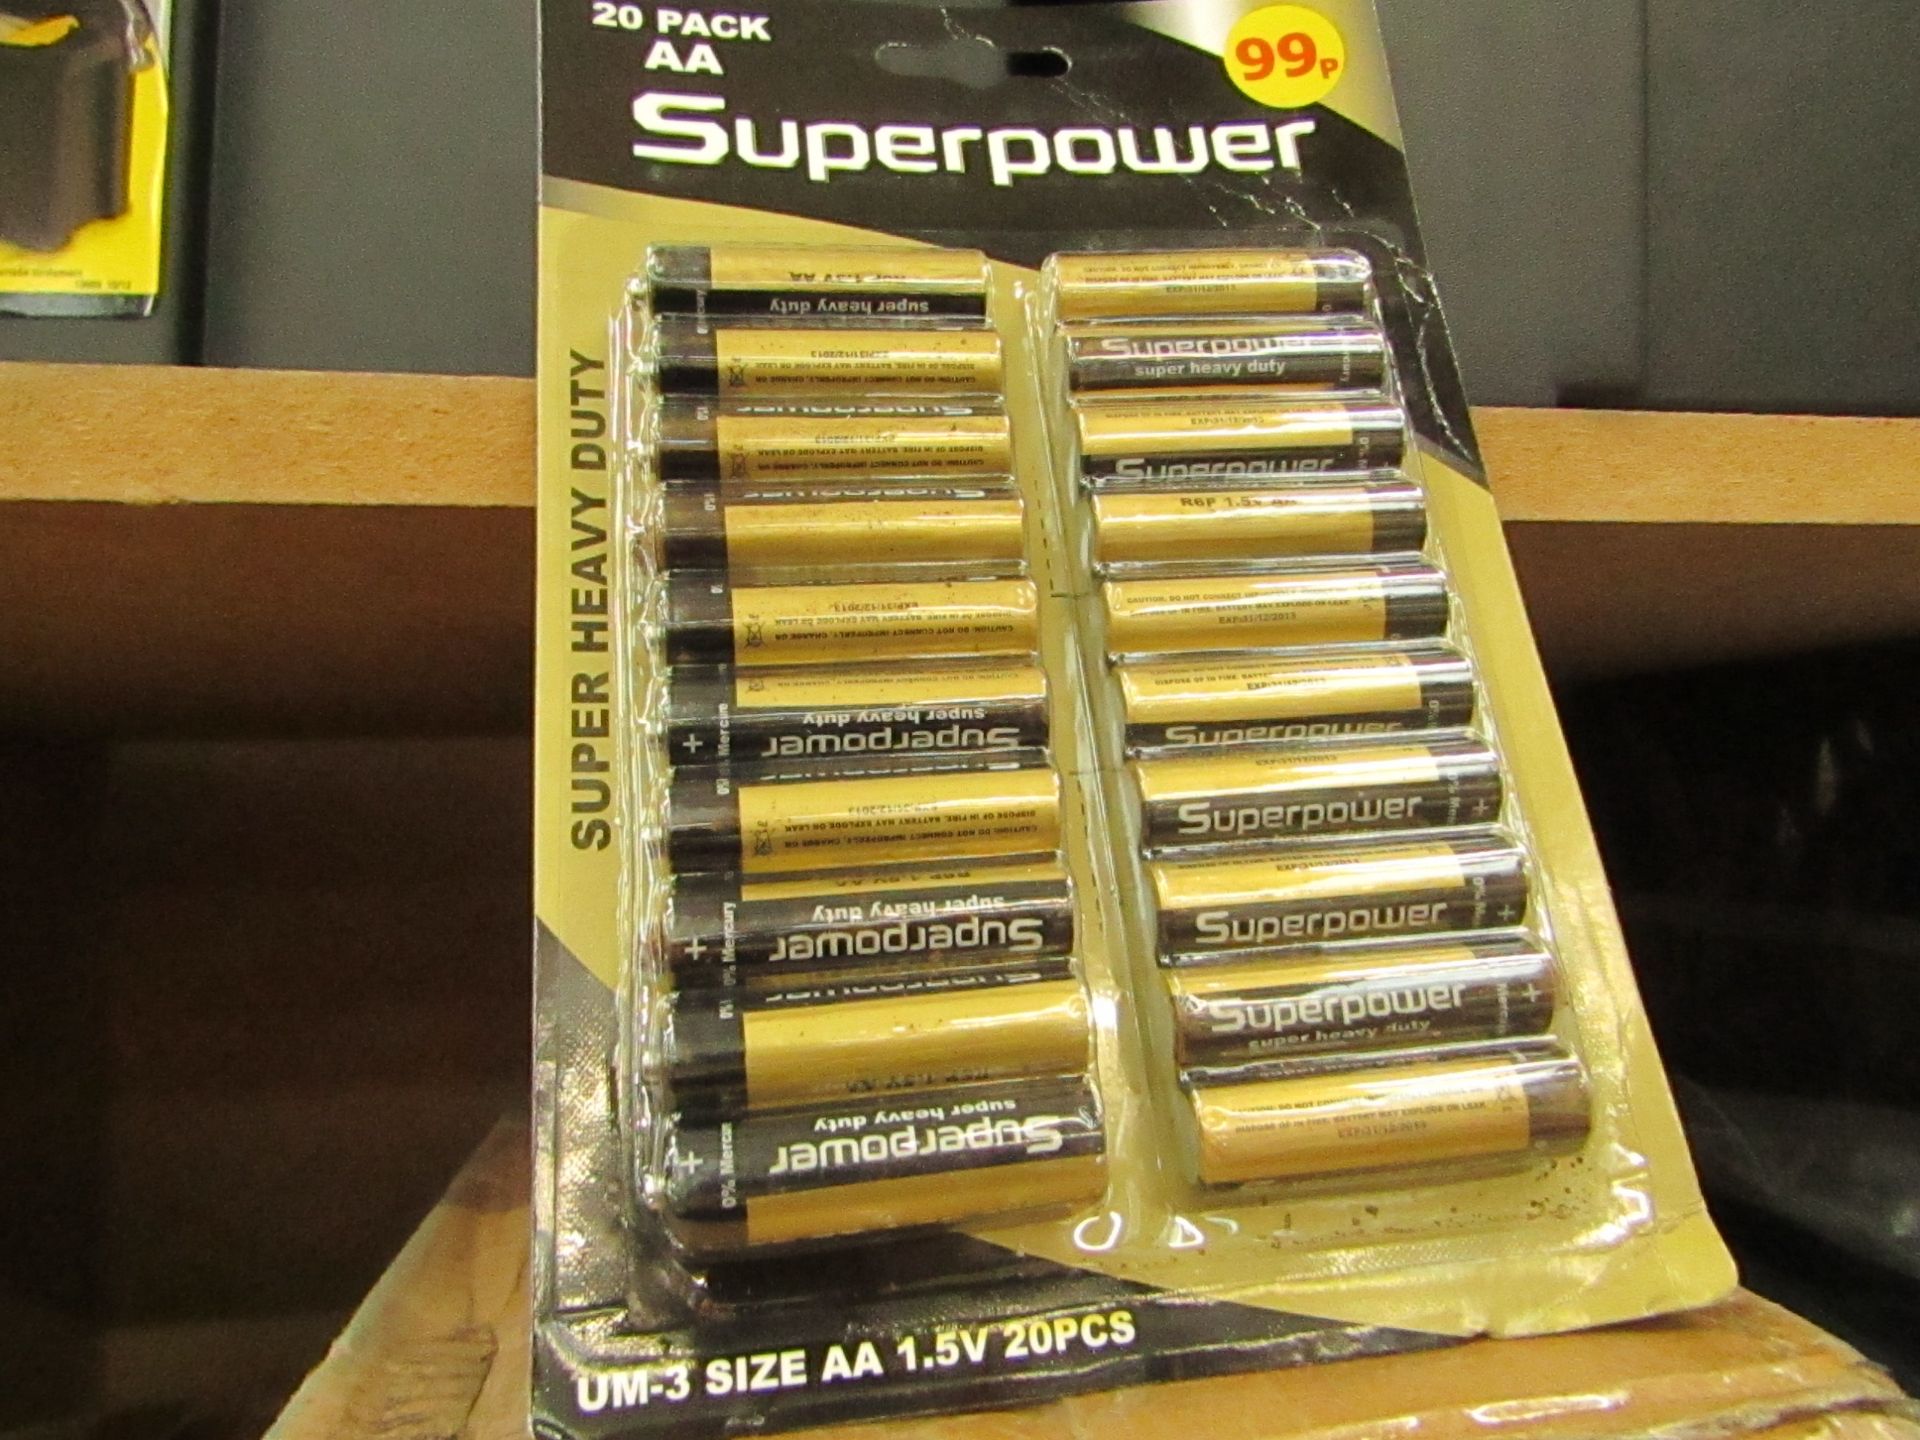 24 Packs of 20 Superpower AA Batteries. EXP 31/12/13. Packaged